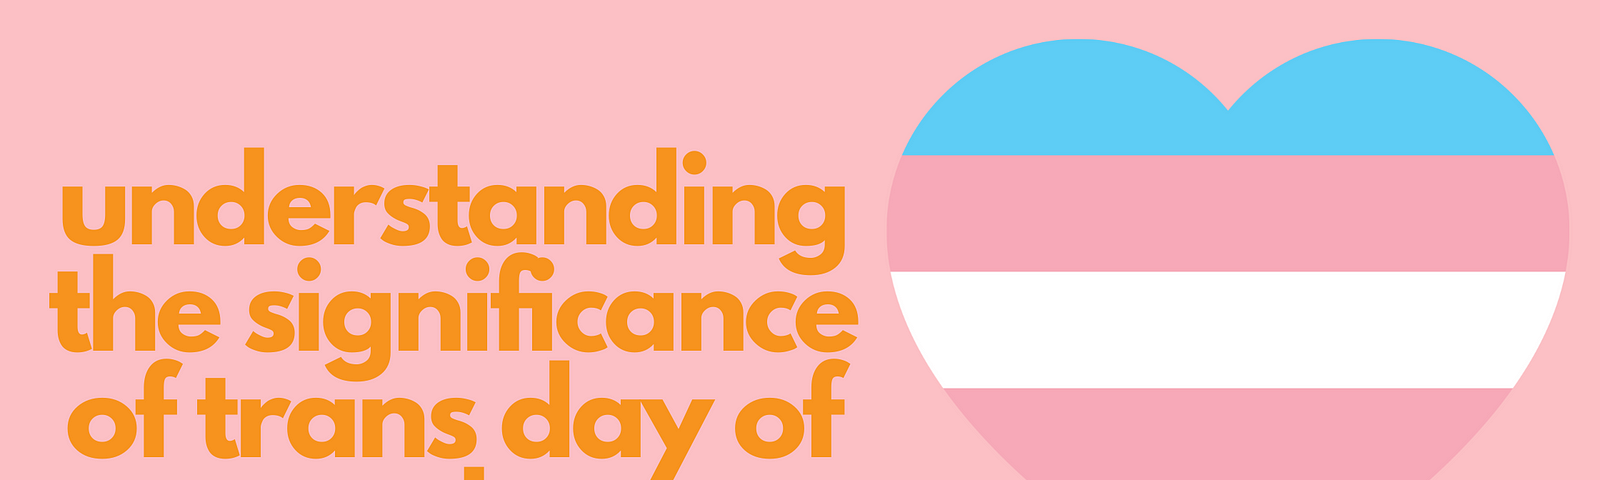 Text reads: Understanding the significance of trans day of remembrance. It is next to an illustration of the transgender flag shaped like a heart.